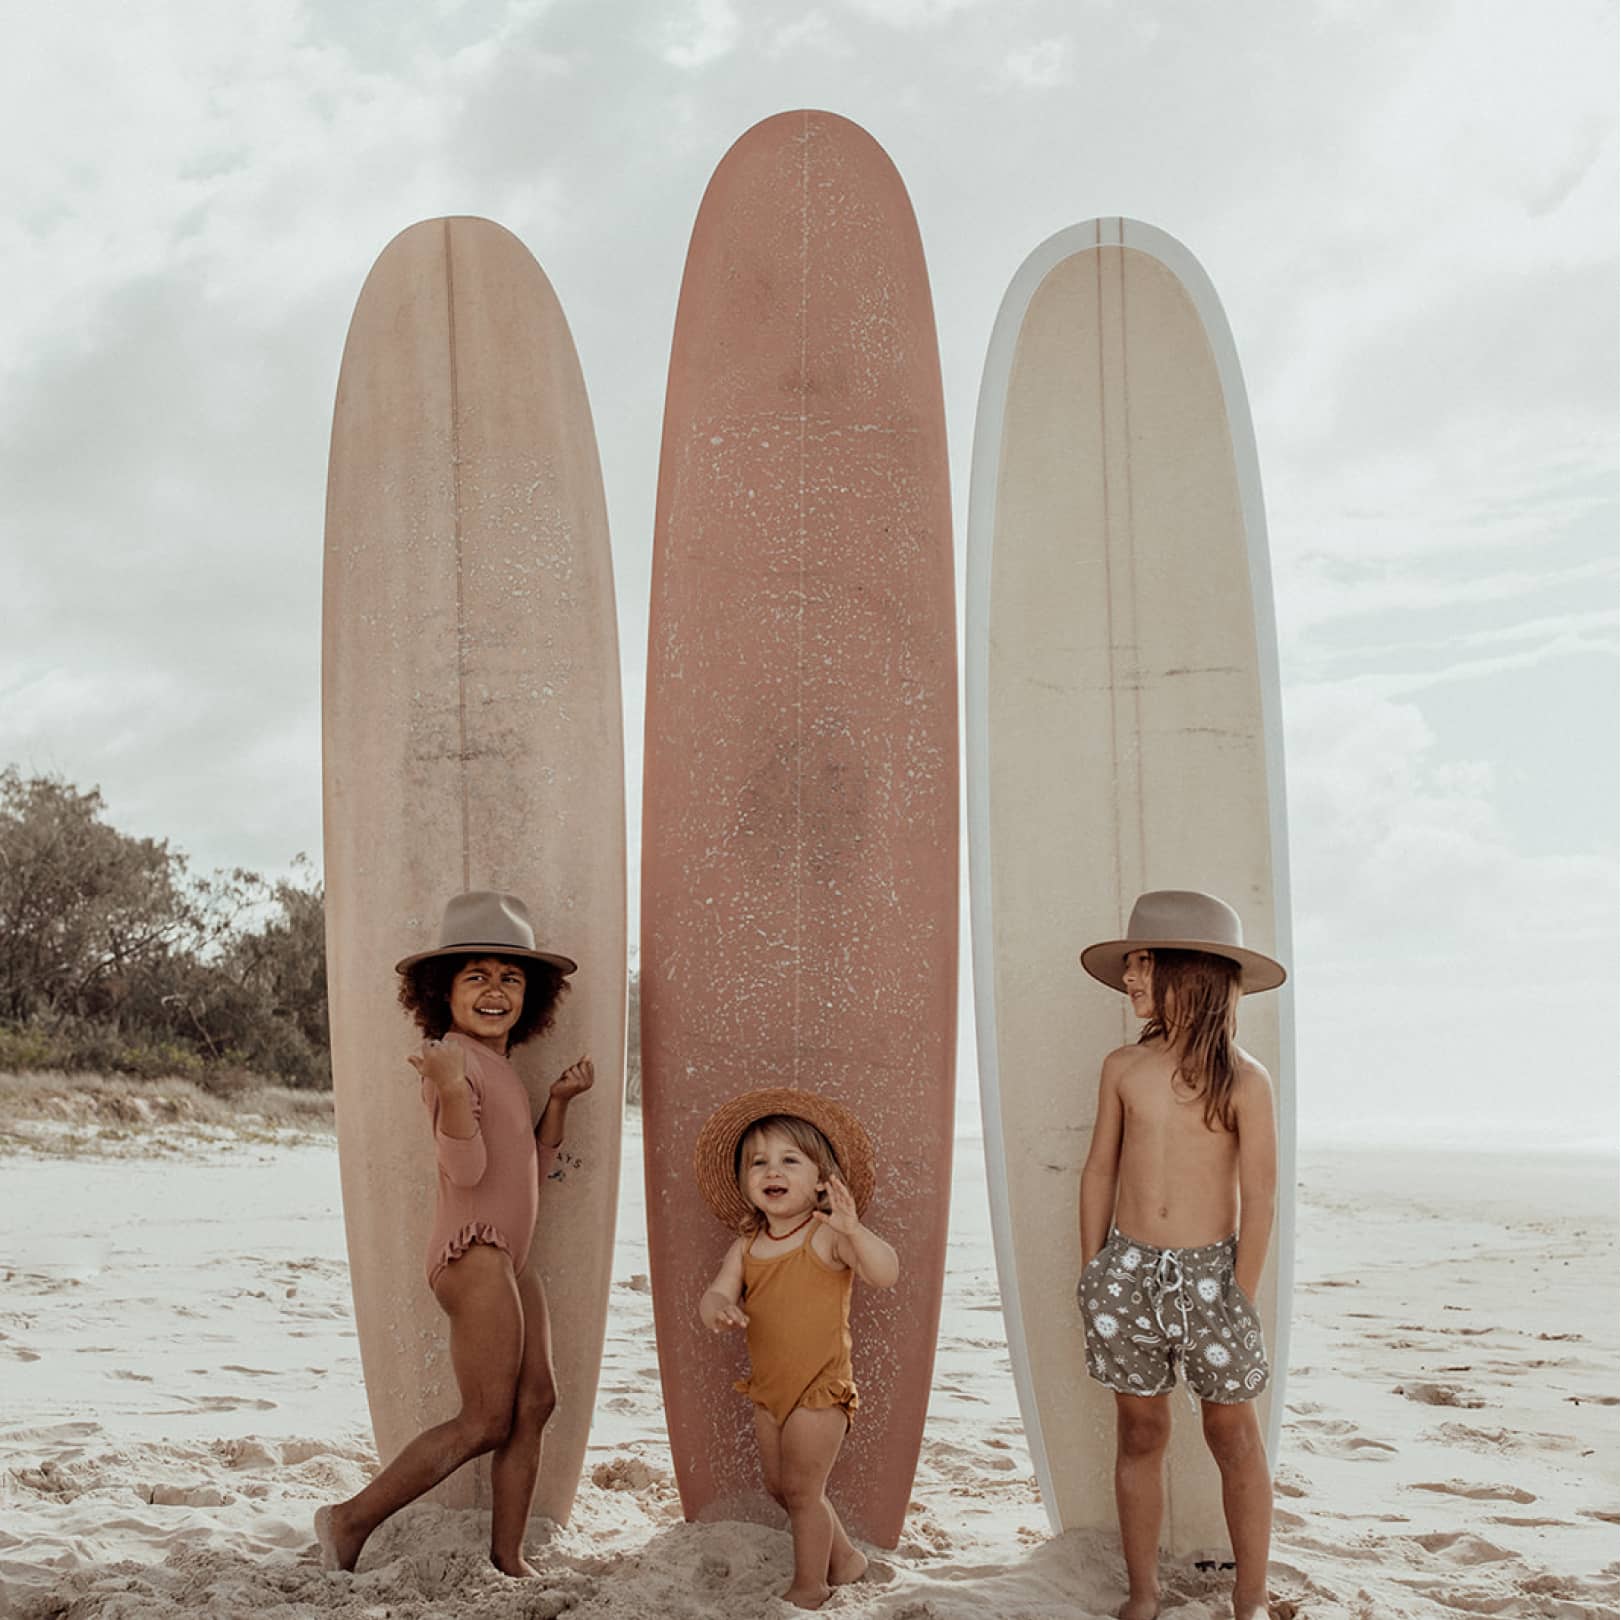 Three children wearing hats standing in front of surf boards on the beach